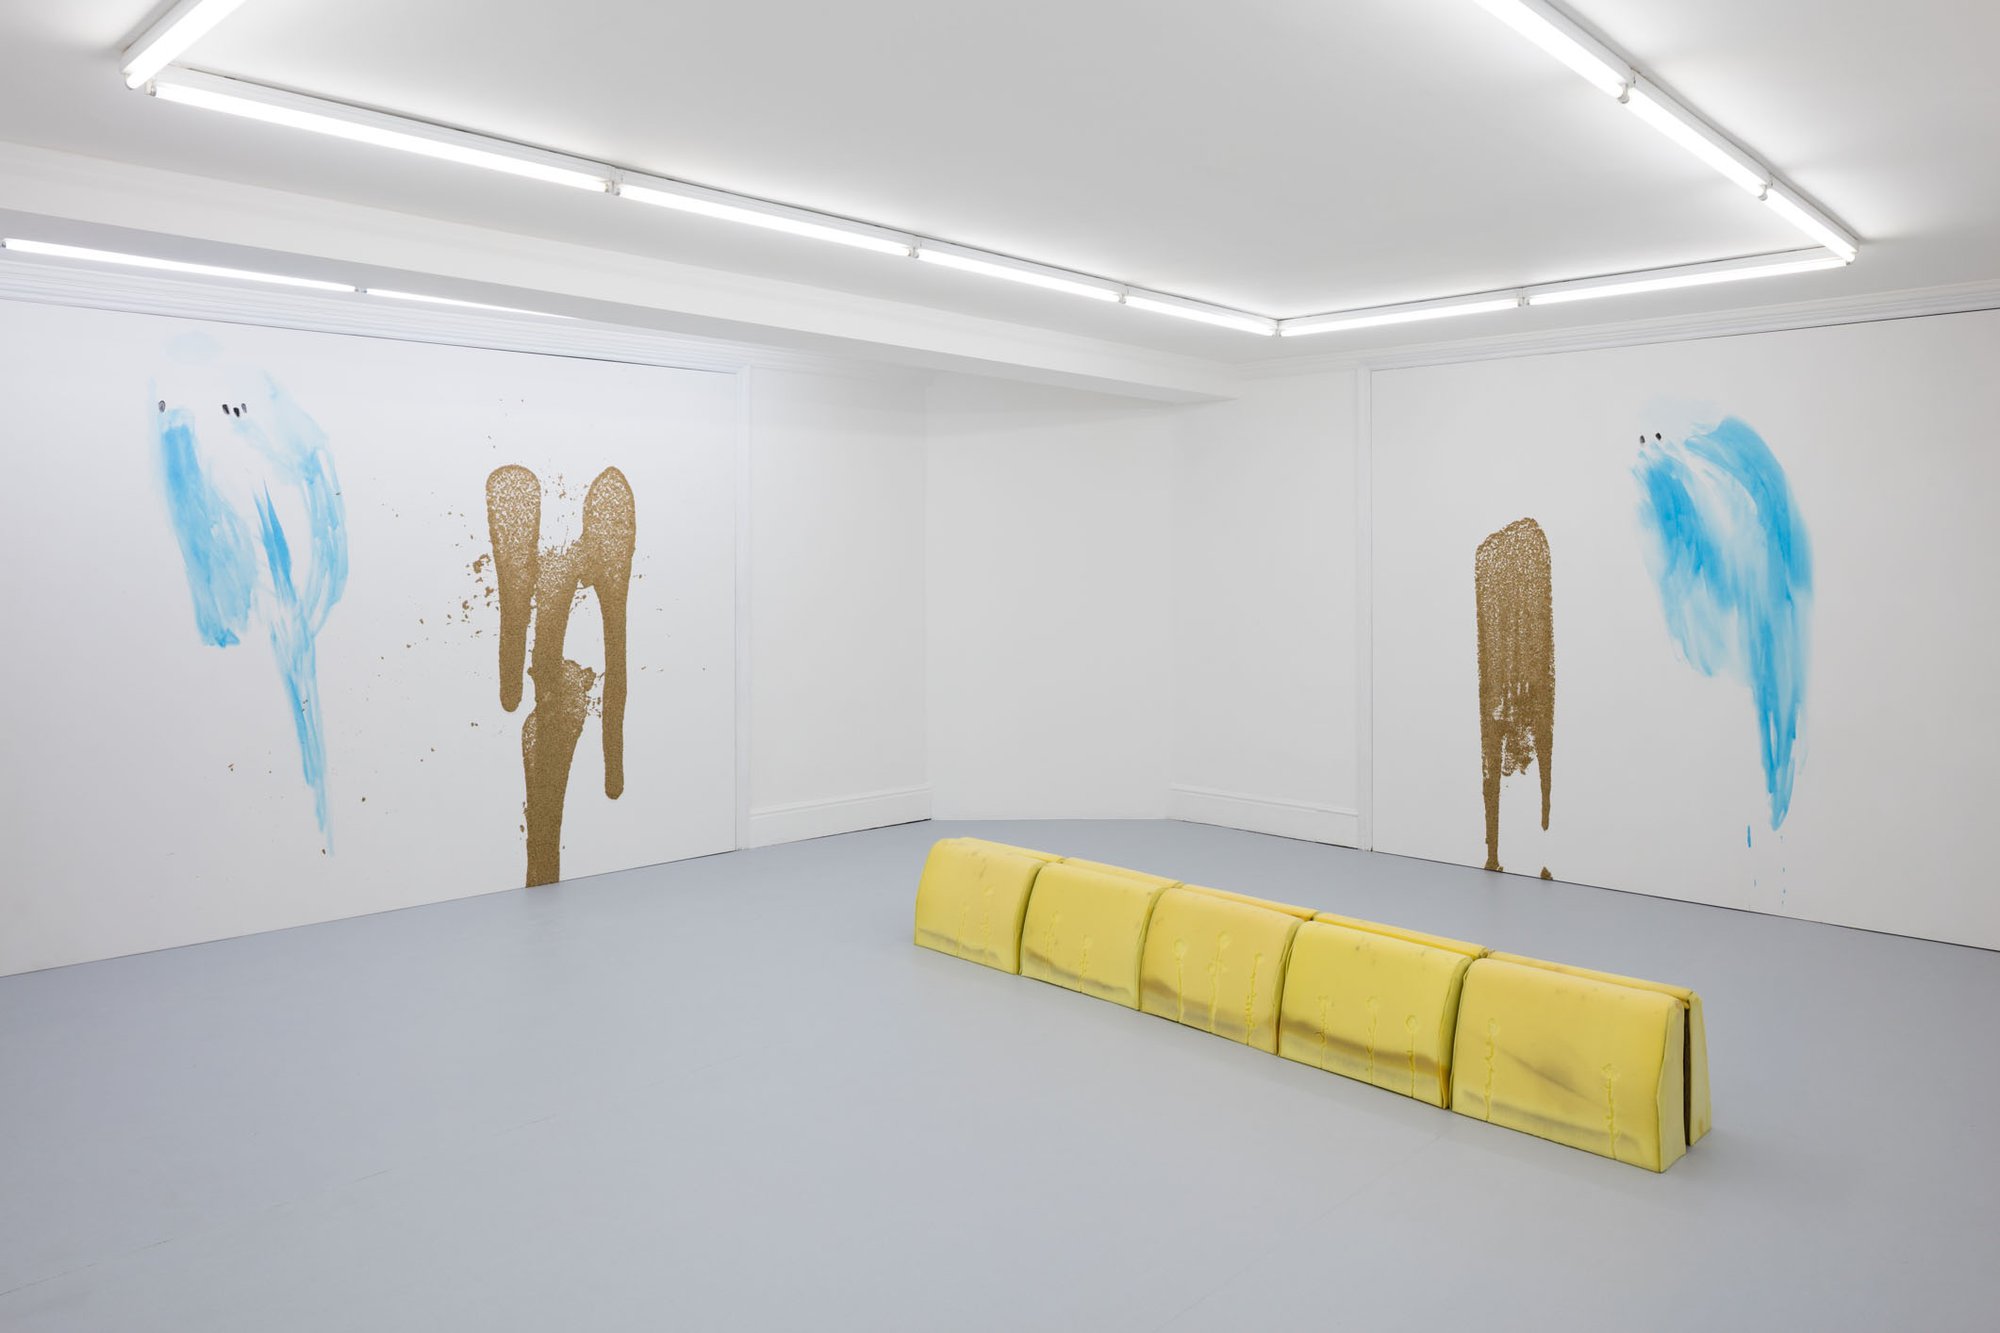 Installation view, Ian Law, you’re adjusting, Rodeo, London, 2015